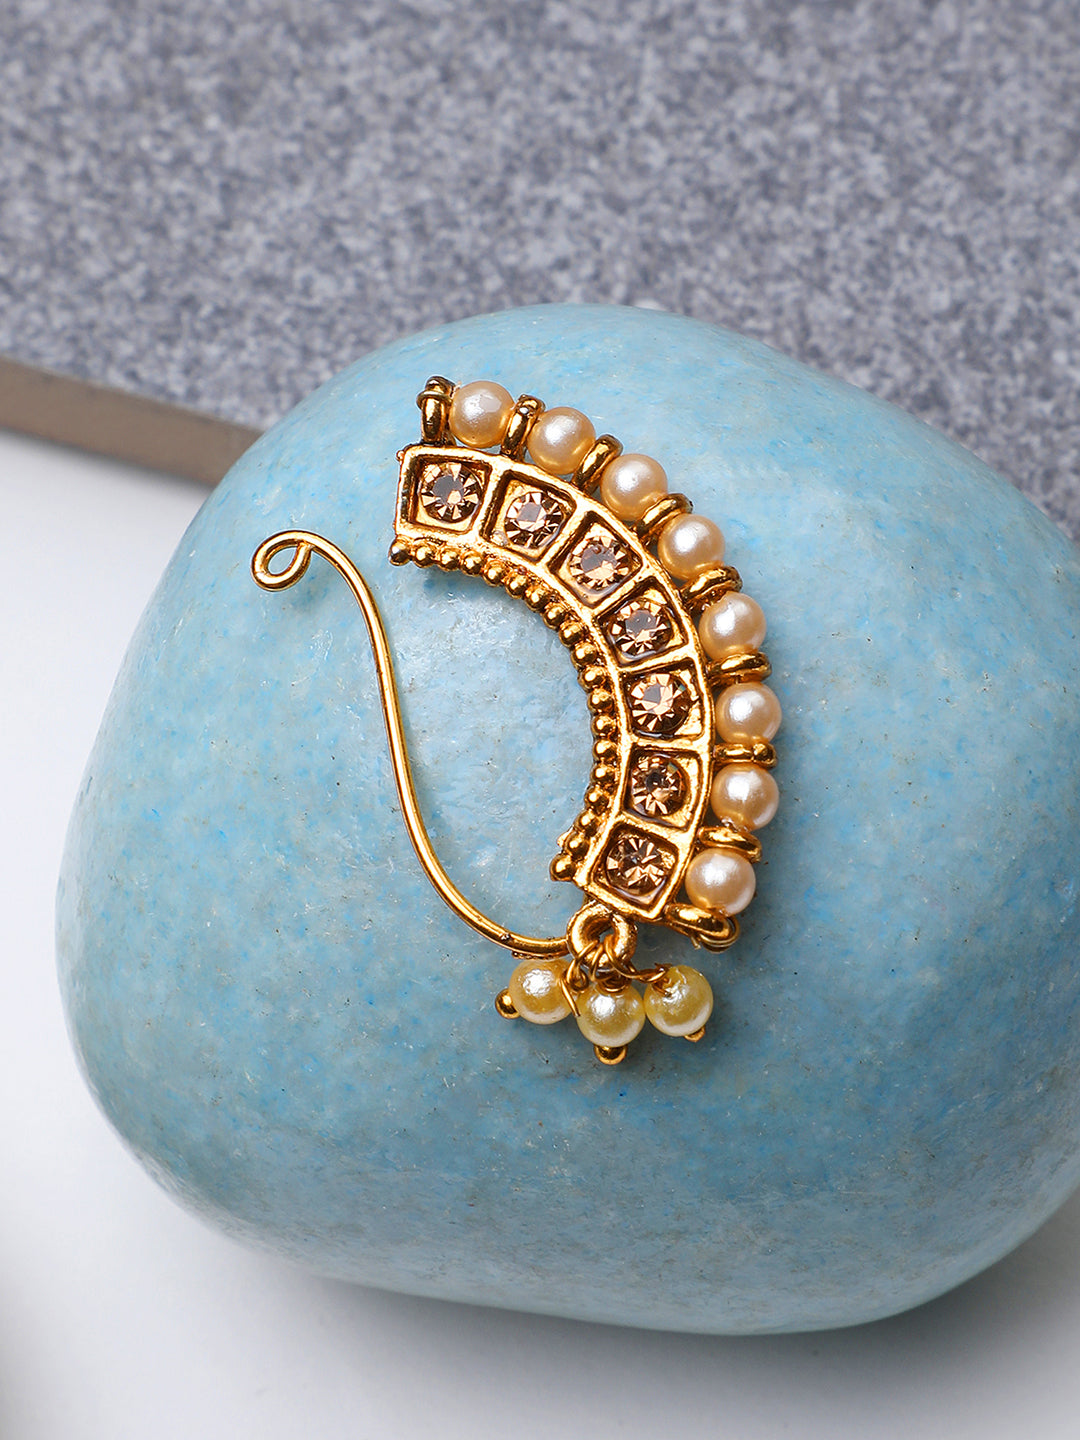 Traditional Gold-Plated Marathi Nose Nath With Pearls By Anikas Creation